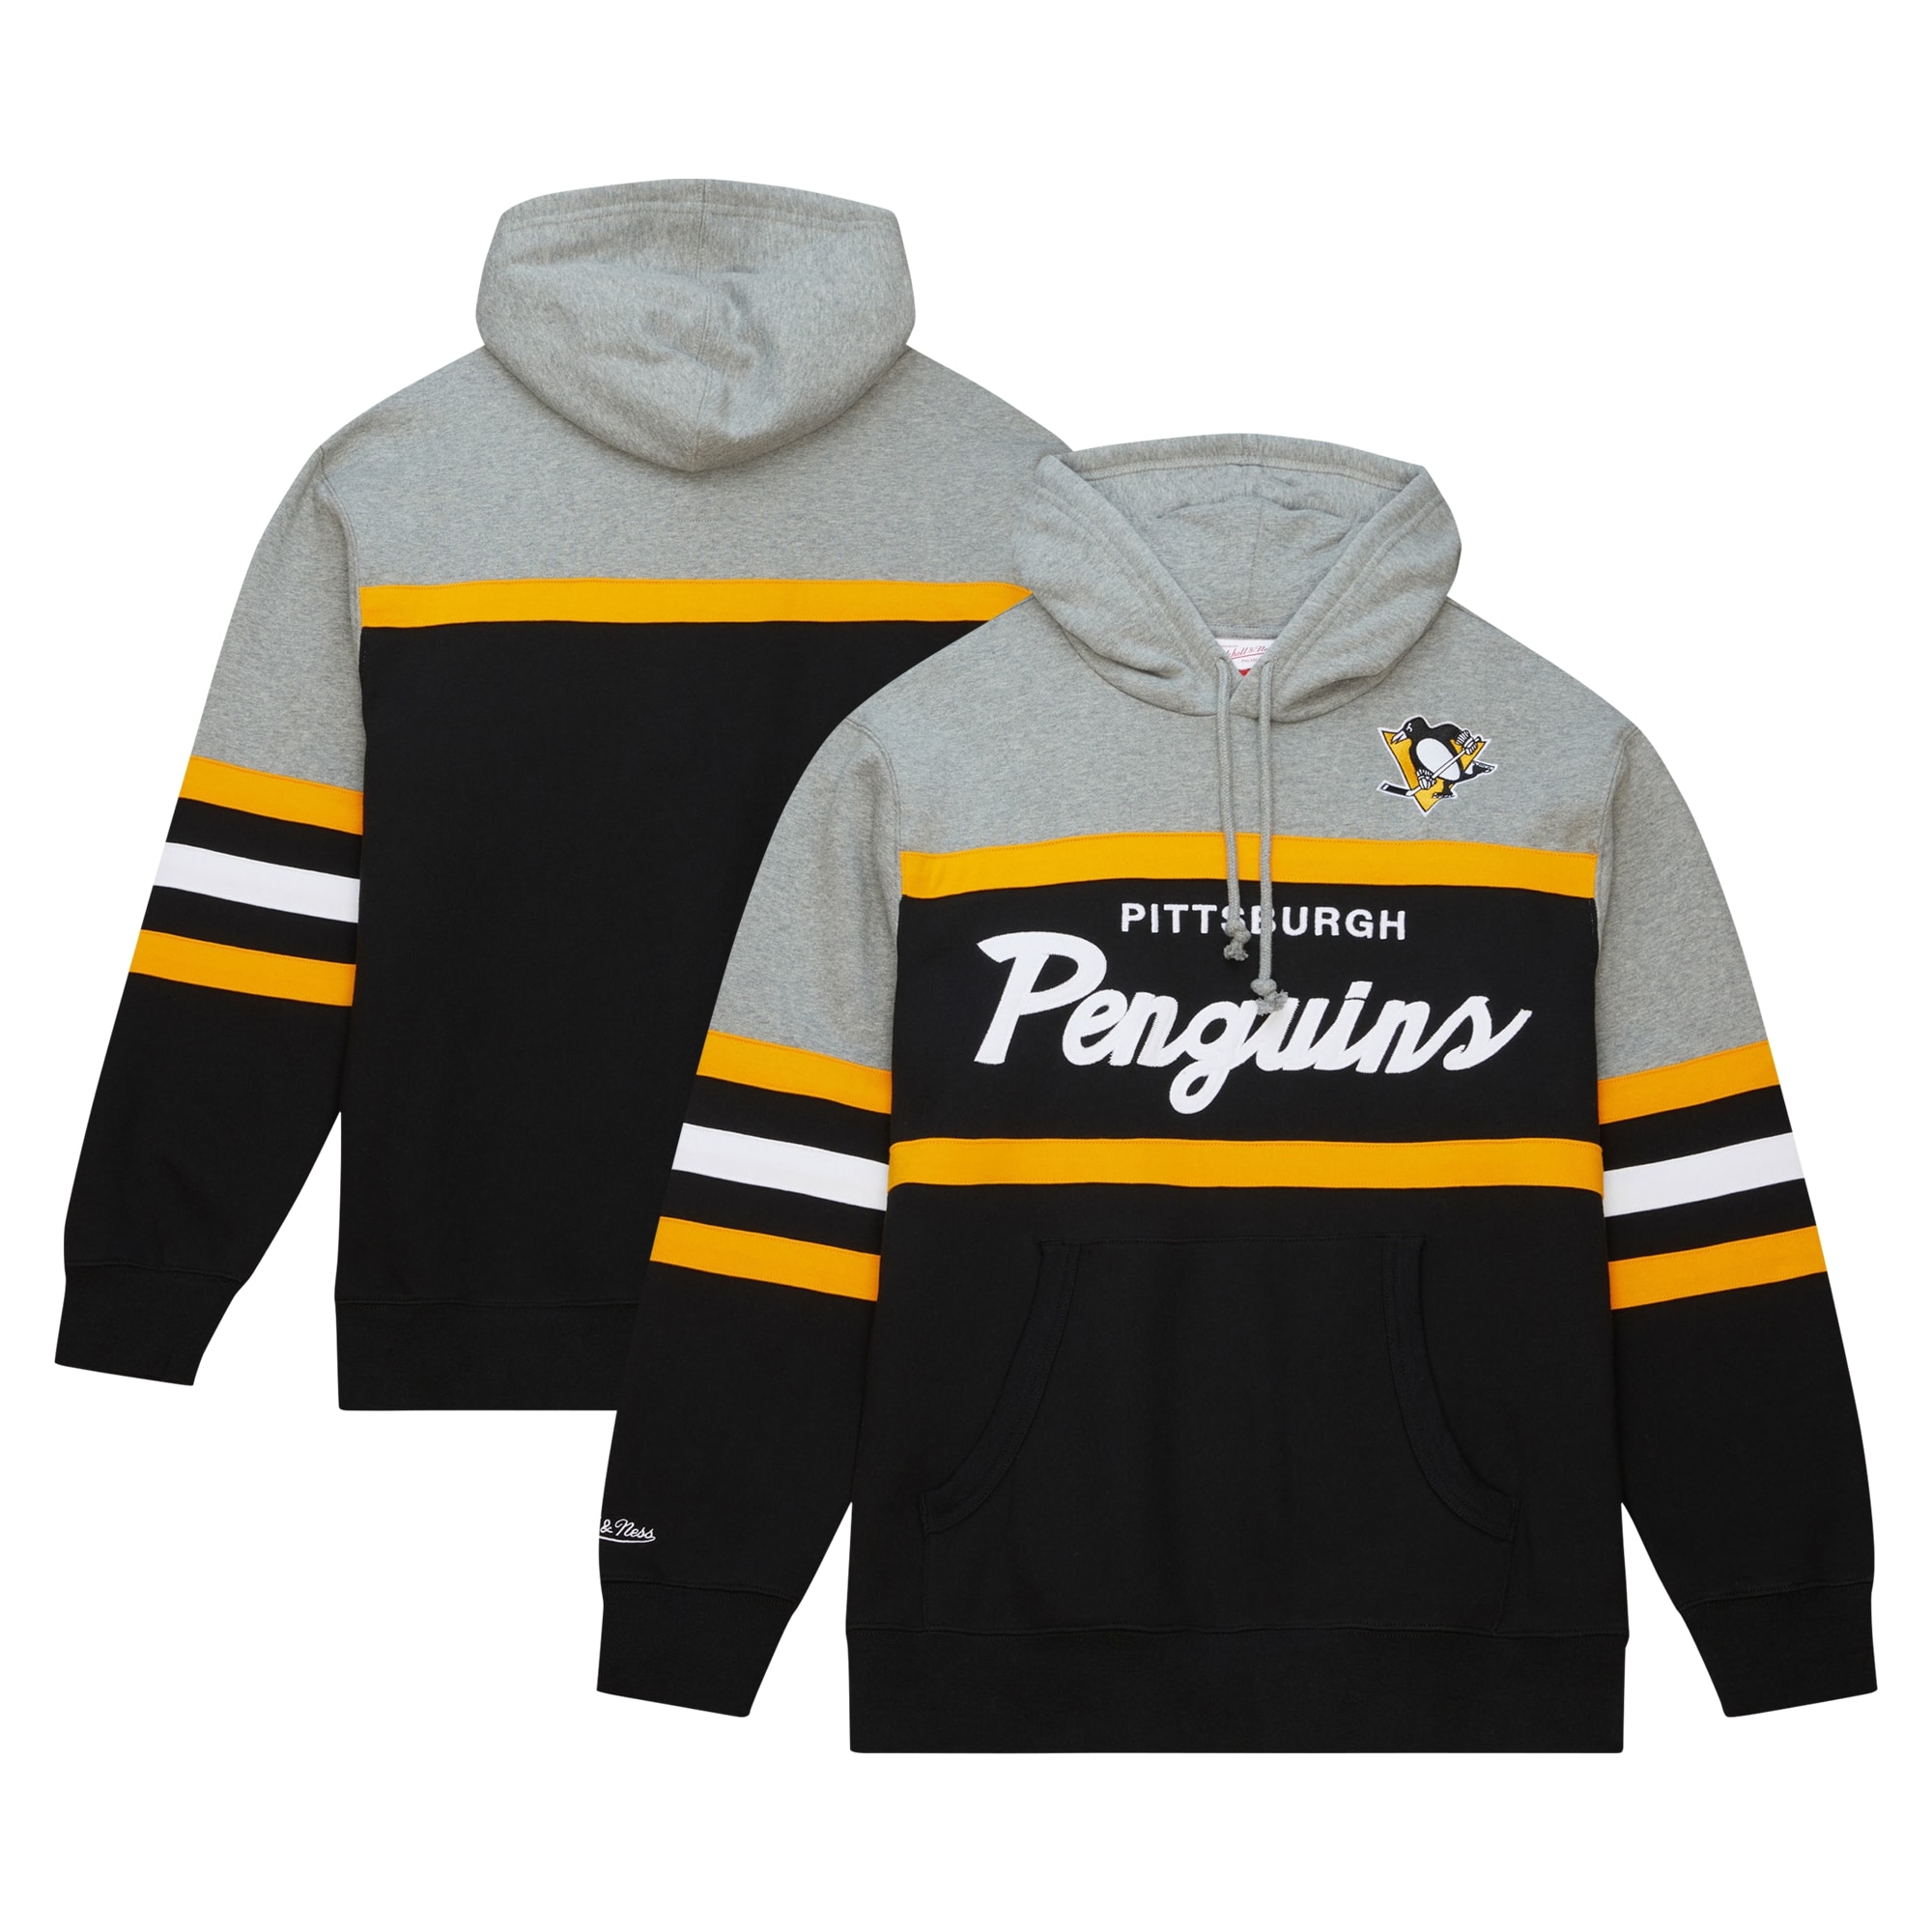 Men's Pittsburgh Penguins Mitchell & Ness Black/Gray Head Coach Pullover Hoodie